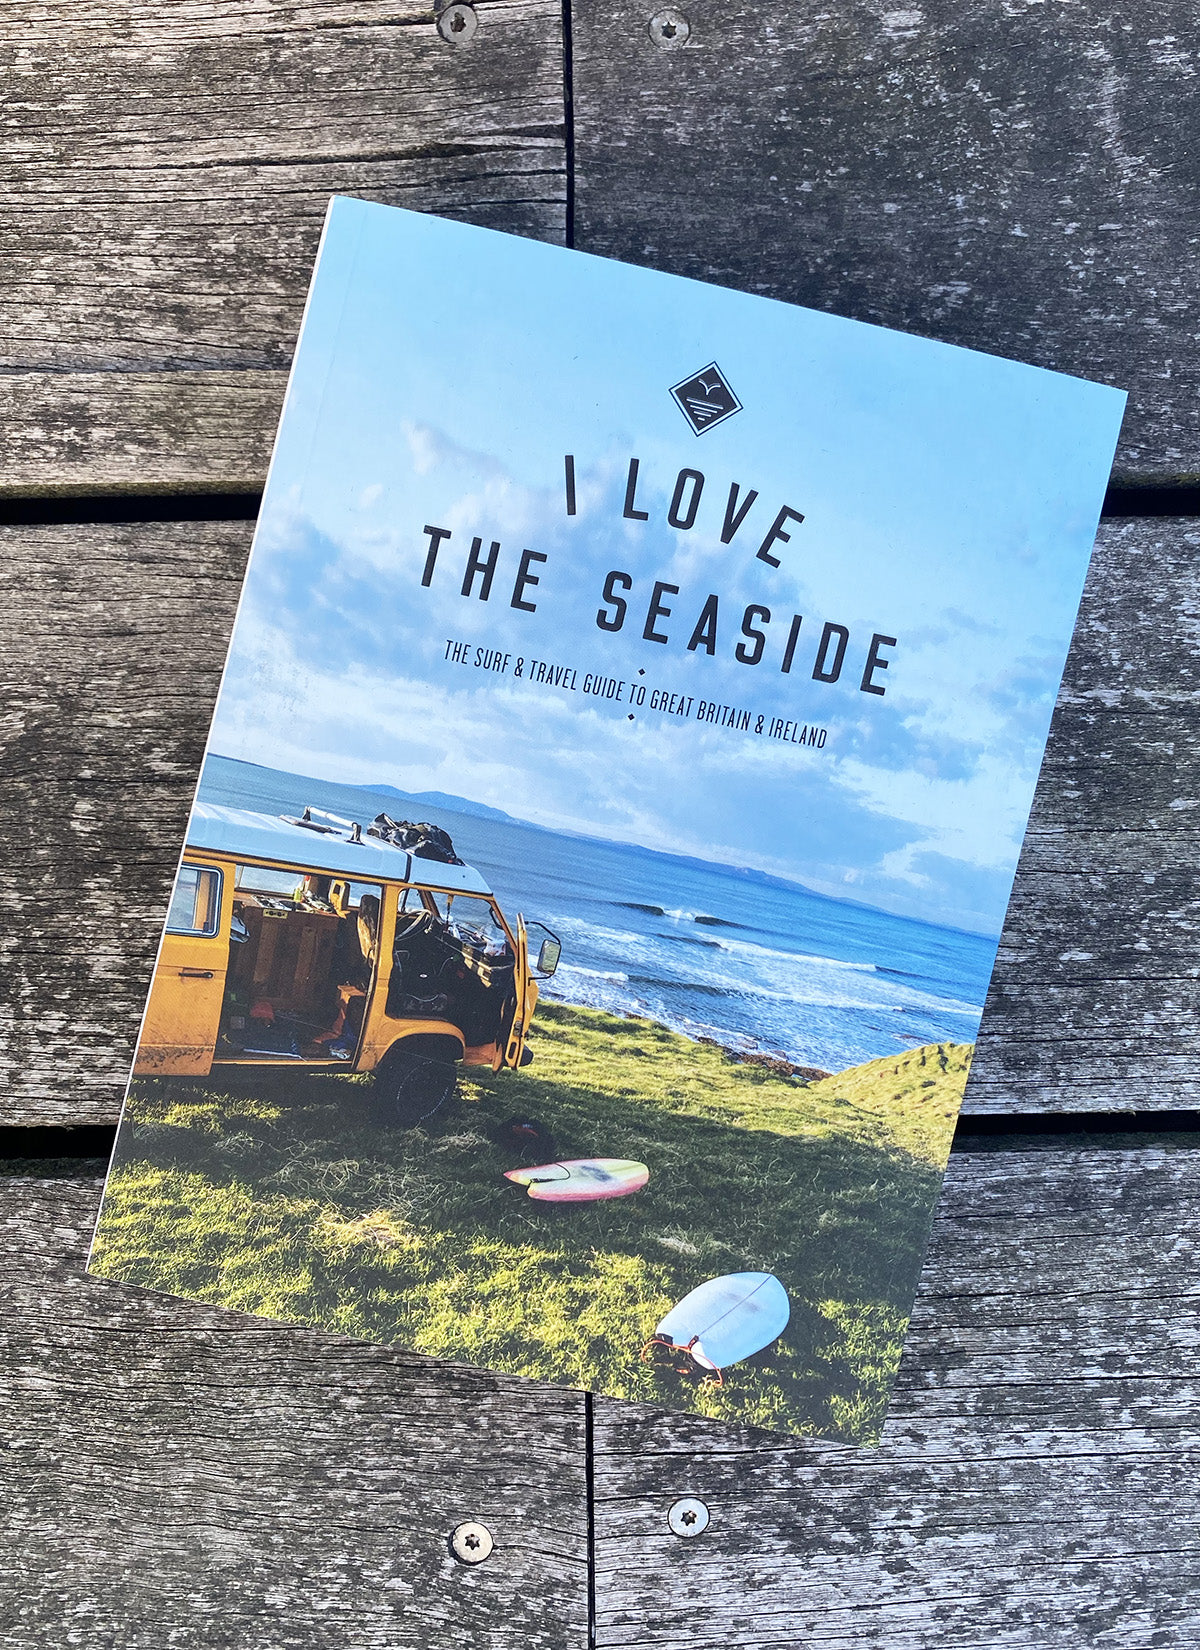 Surf & Travel Guide "I Love the Seaside" - Great Britain & Ireland